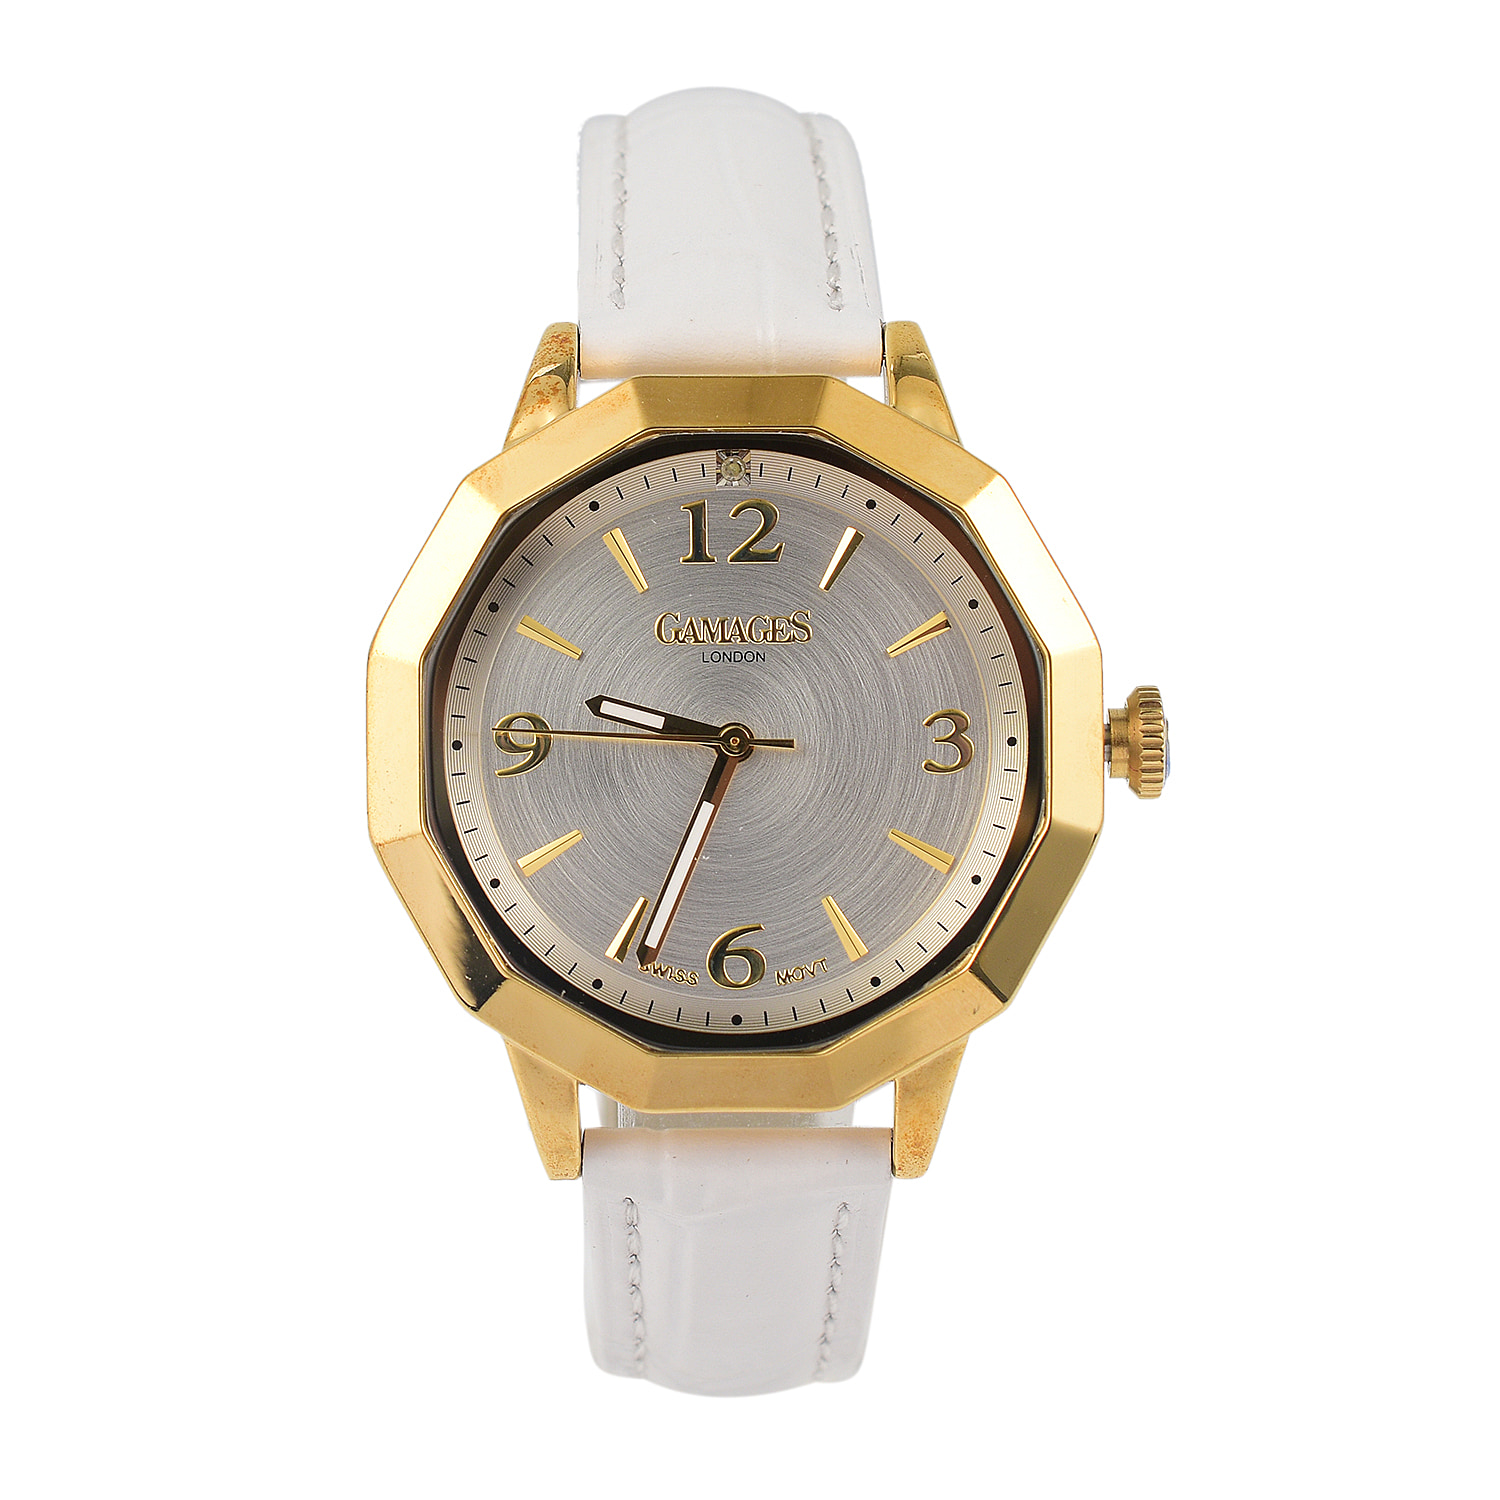 Gamages of London Ladies Dame Diamond Swiss Quartz Movement Water Resistant Watch with White Leather Strap in Gold Tone